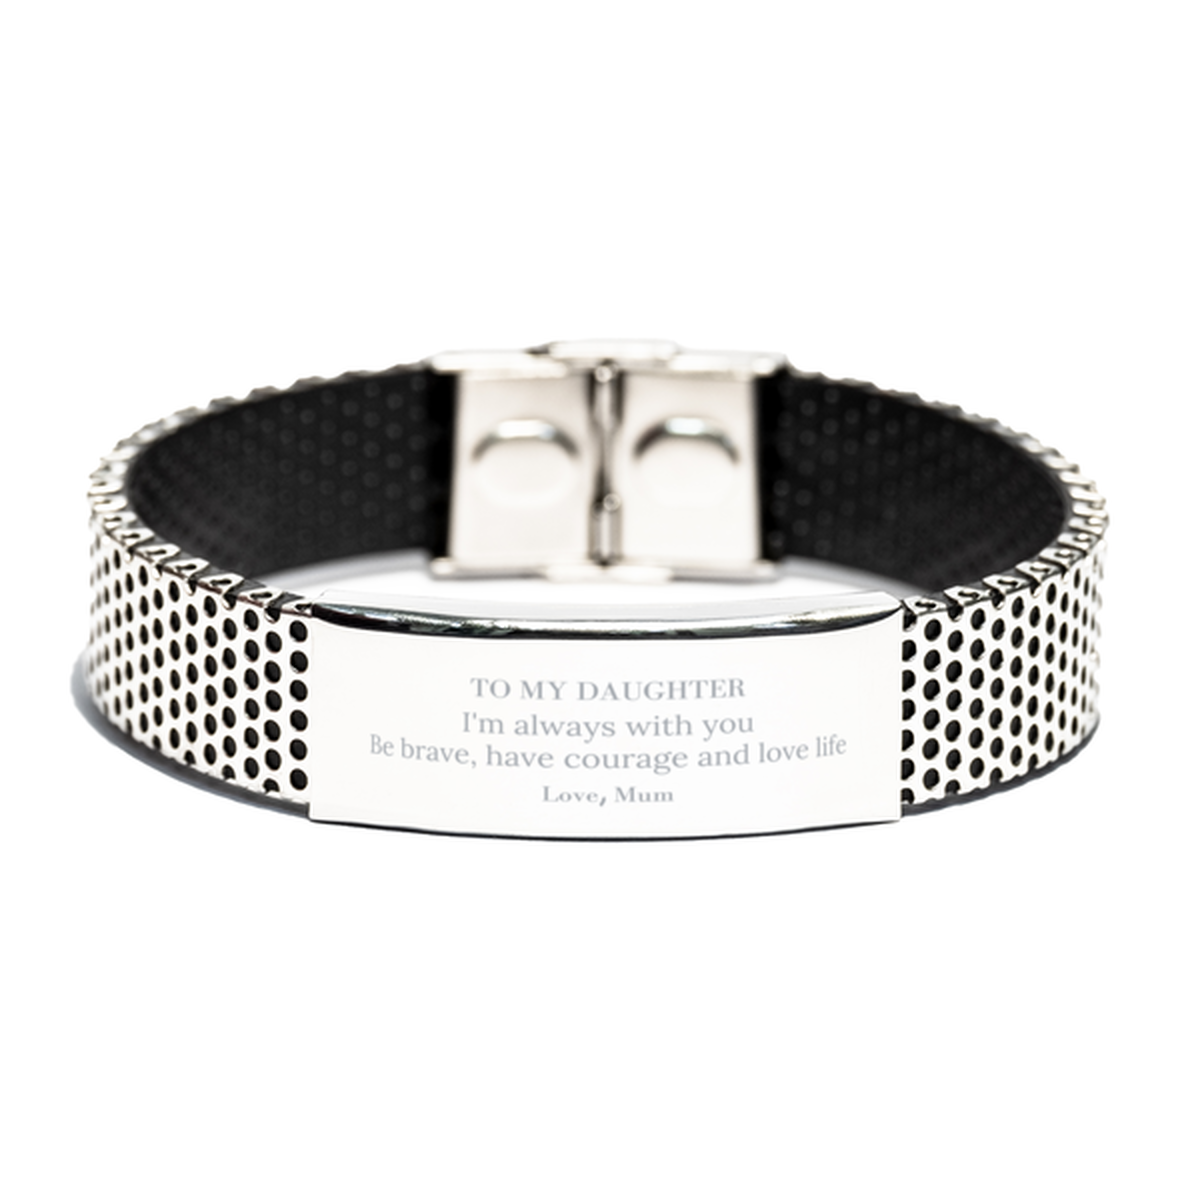 To My Daughter Gifts from Mum, Unique Stainless Steel Bracelet Inspirational Christmas Birthday Graduation Gifts for Daughter I'm always with you. Be brave, have courage and love life. Love, Mum